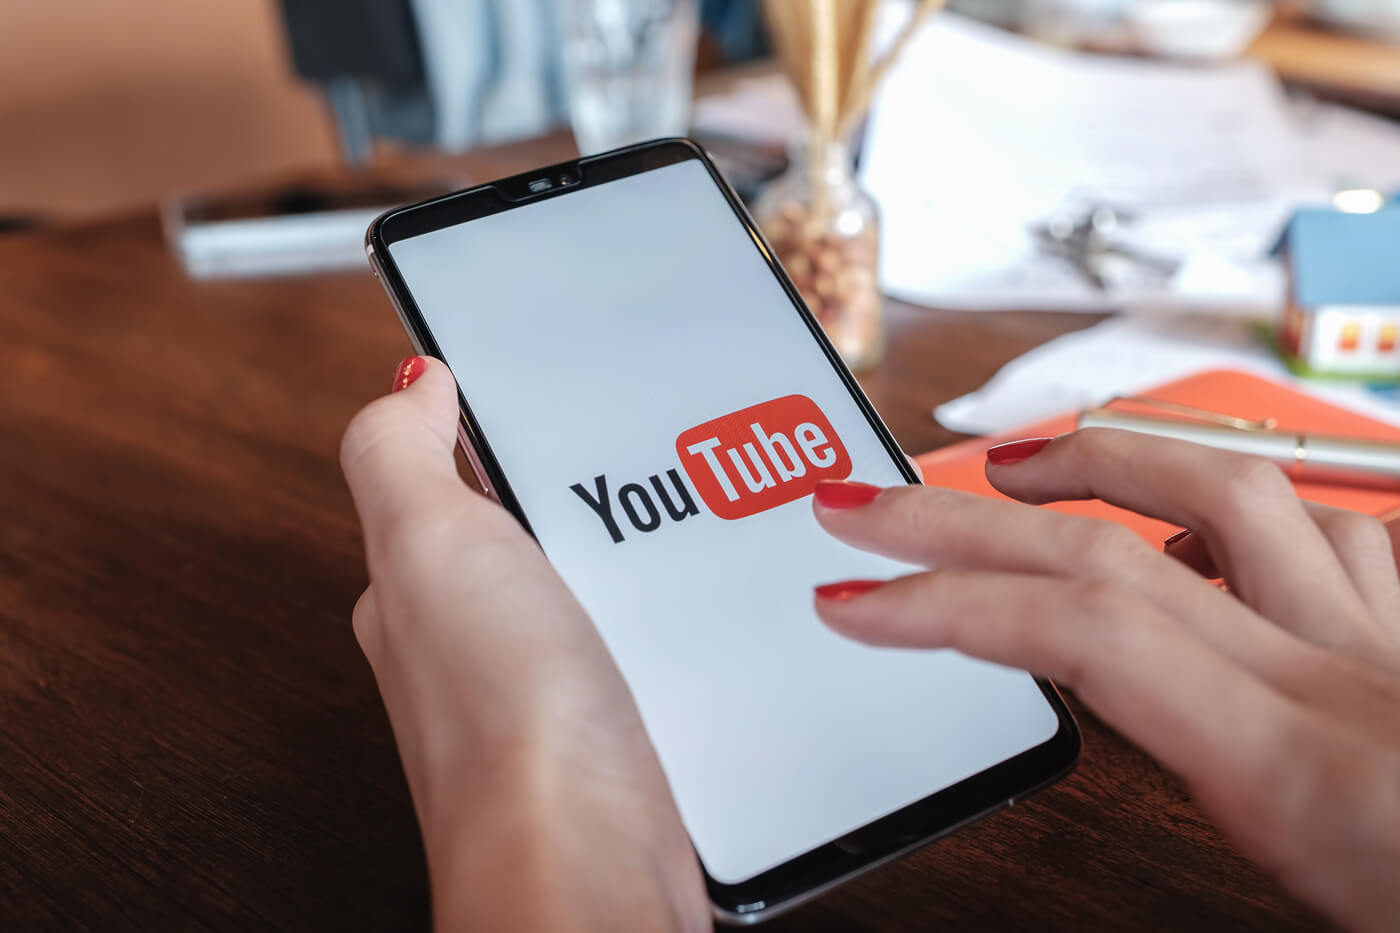 YouTube updates app with a new 'Explore' tab